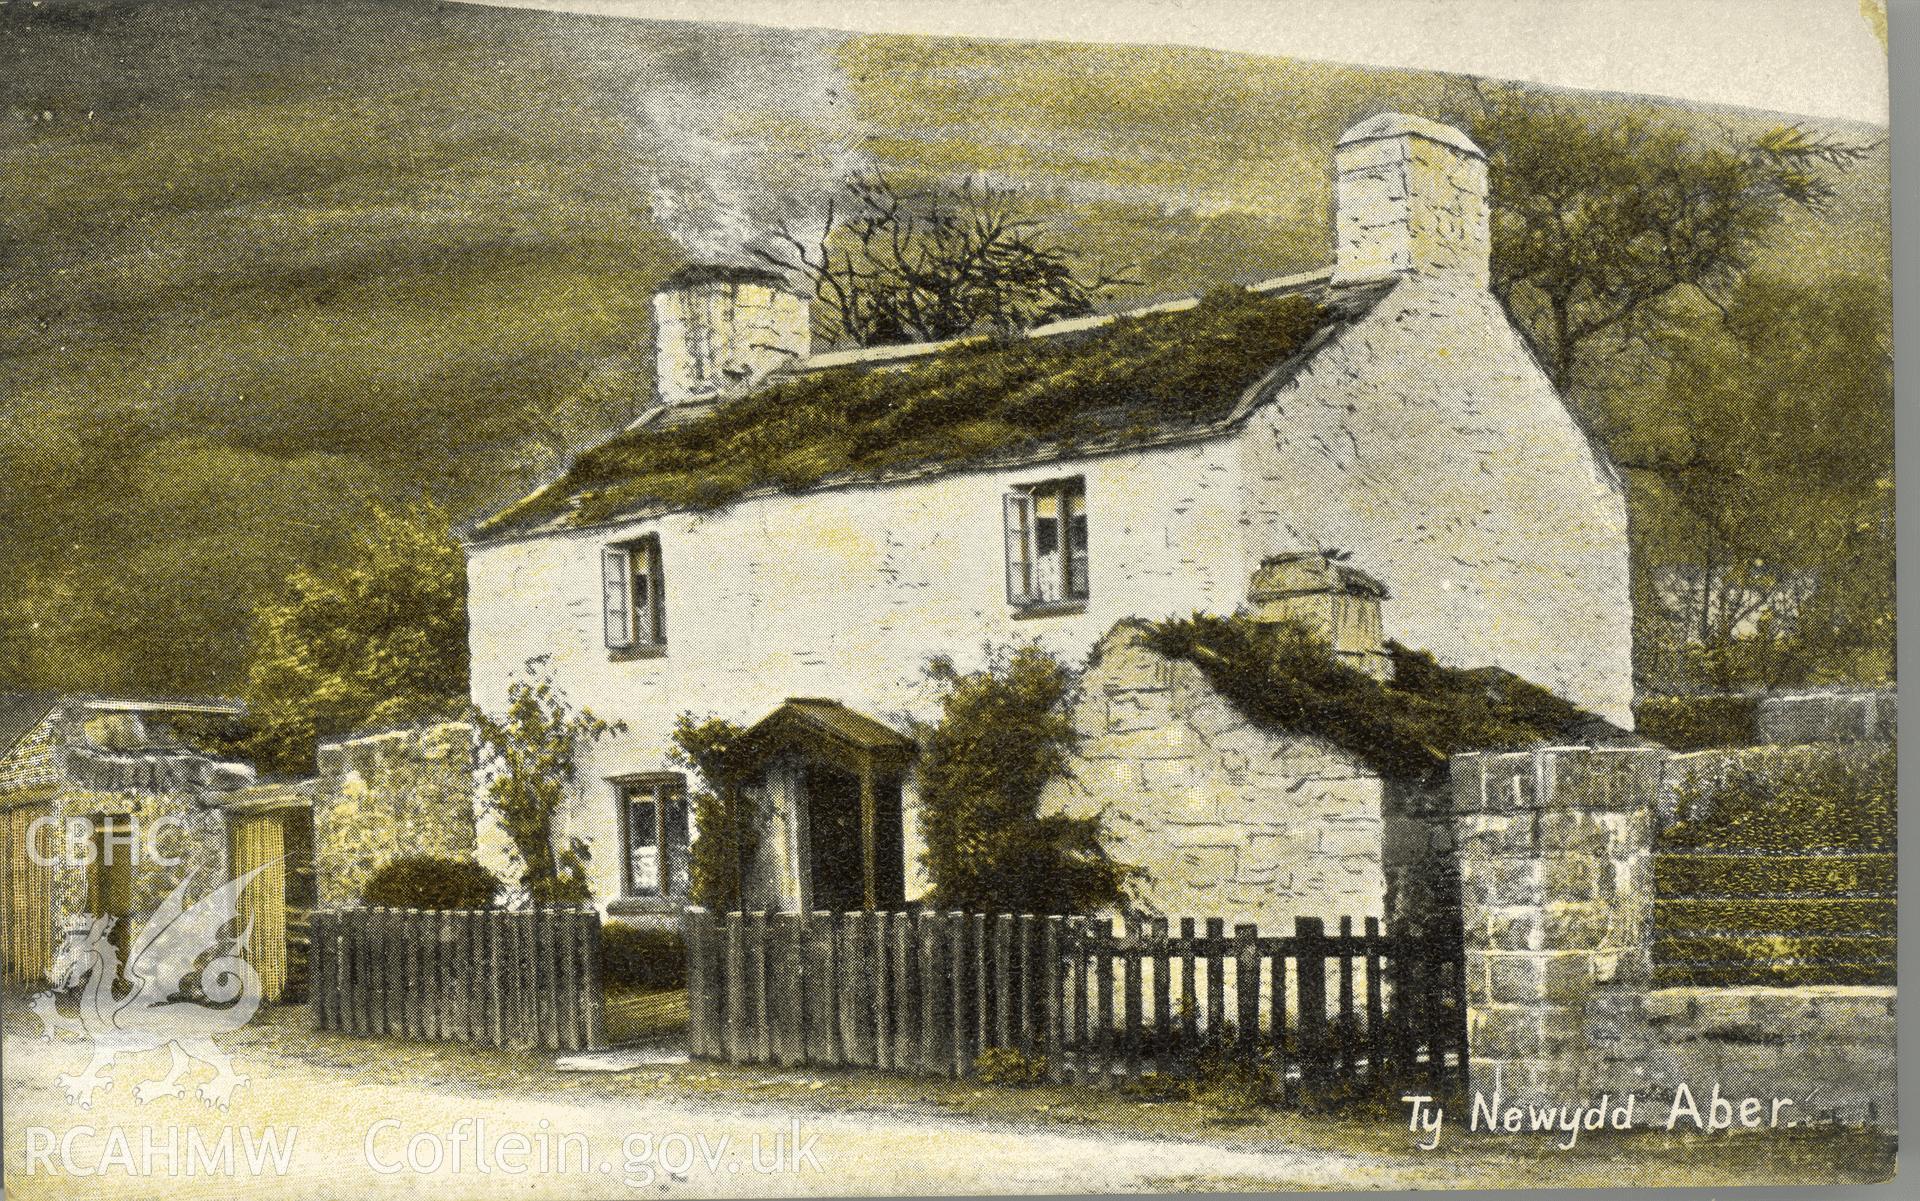 Digitised postcard image of Abergwyngregyn village (Aber), the Wrench Series. Produced by Parks and Gardens Data Services, from an original item in the Peter Davis Collection at Parks and Gardens UK. We hold only web-resolution images of this collection, suitable for viewing on screen and for research purposes only. We do not hold the original images, or publication quality scans.